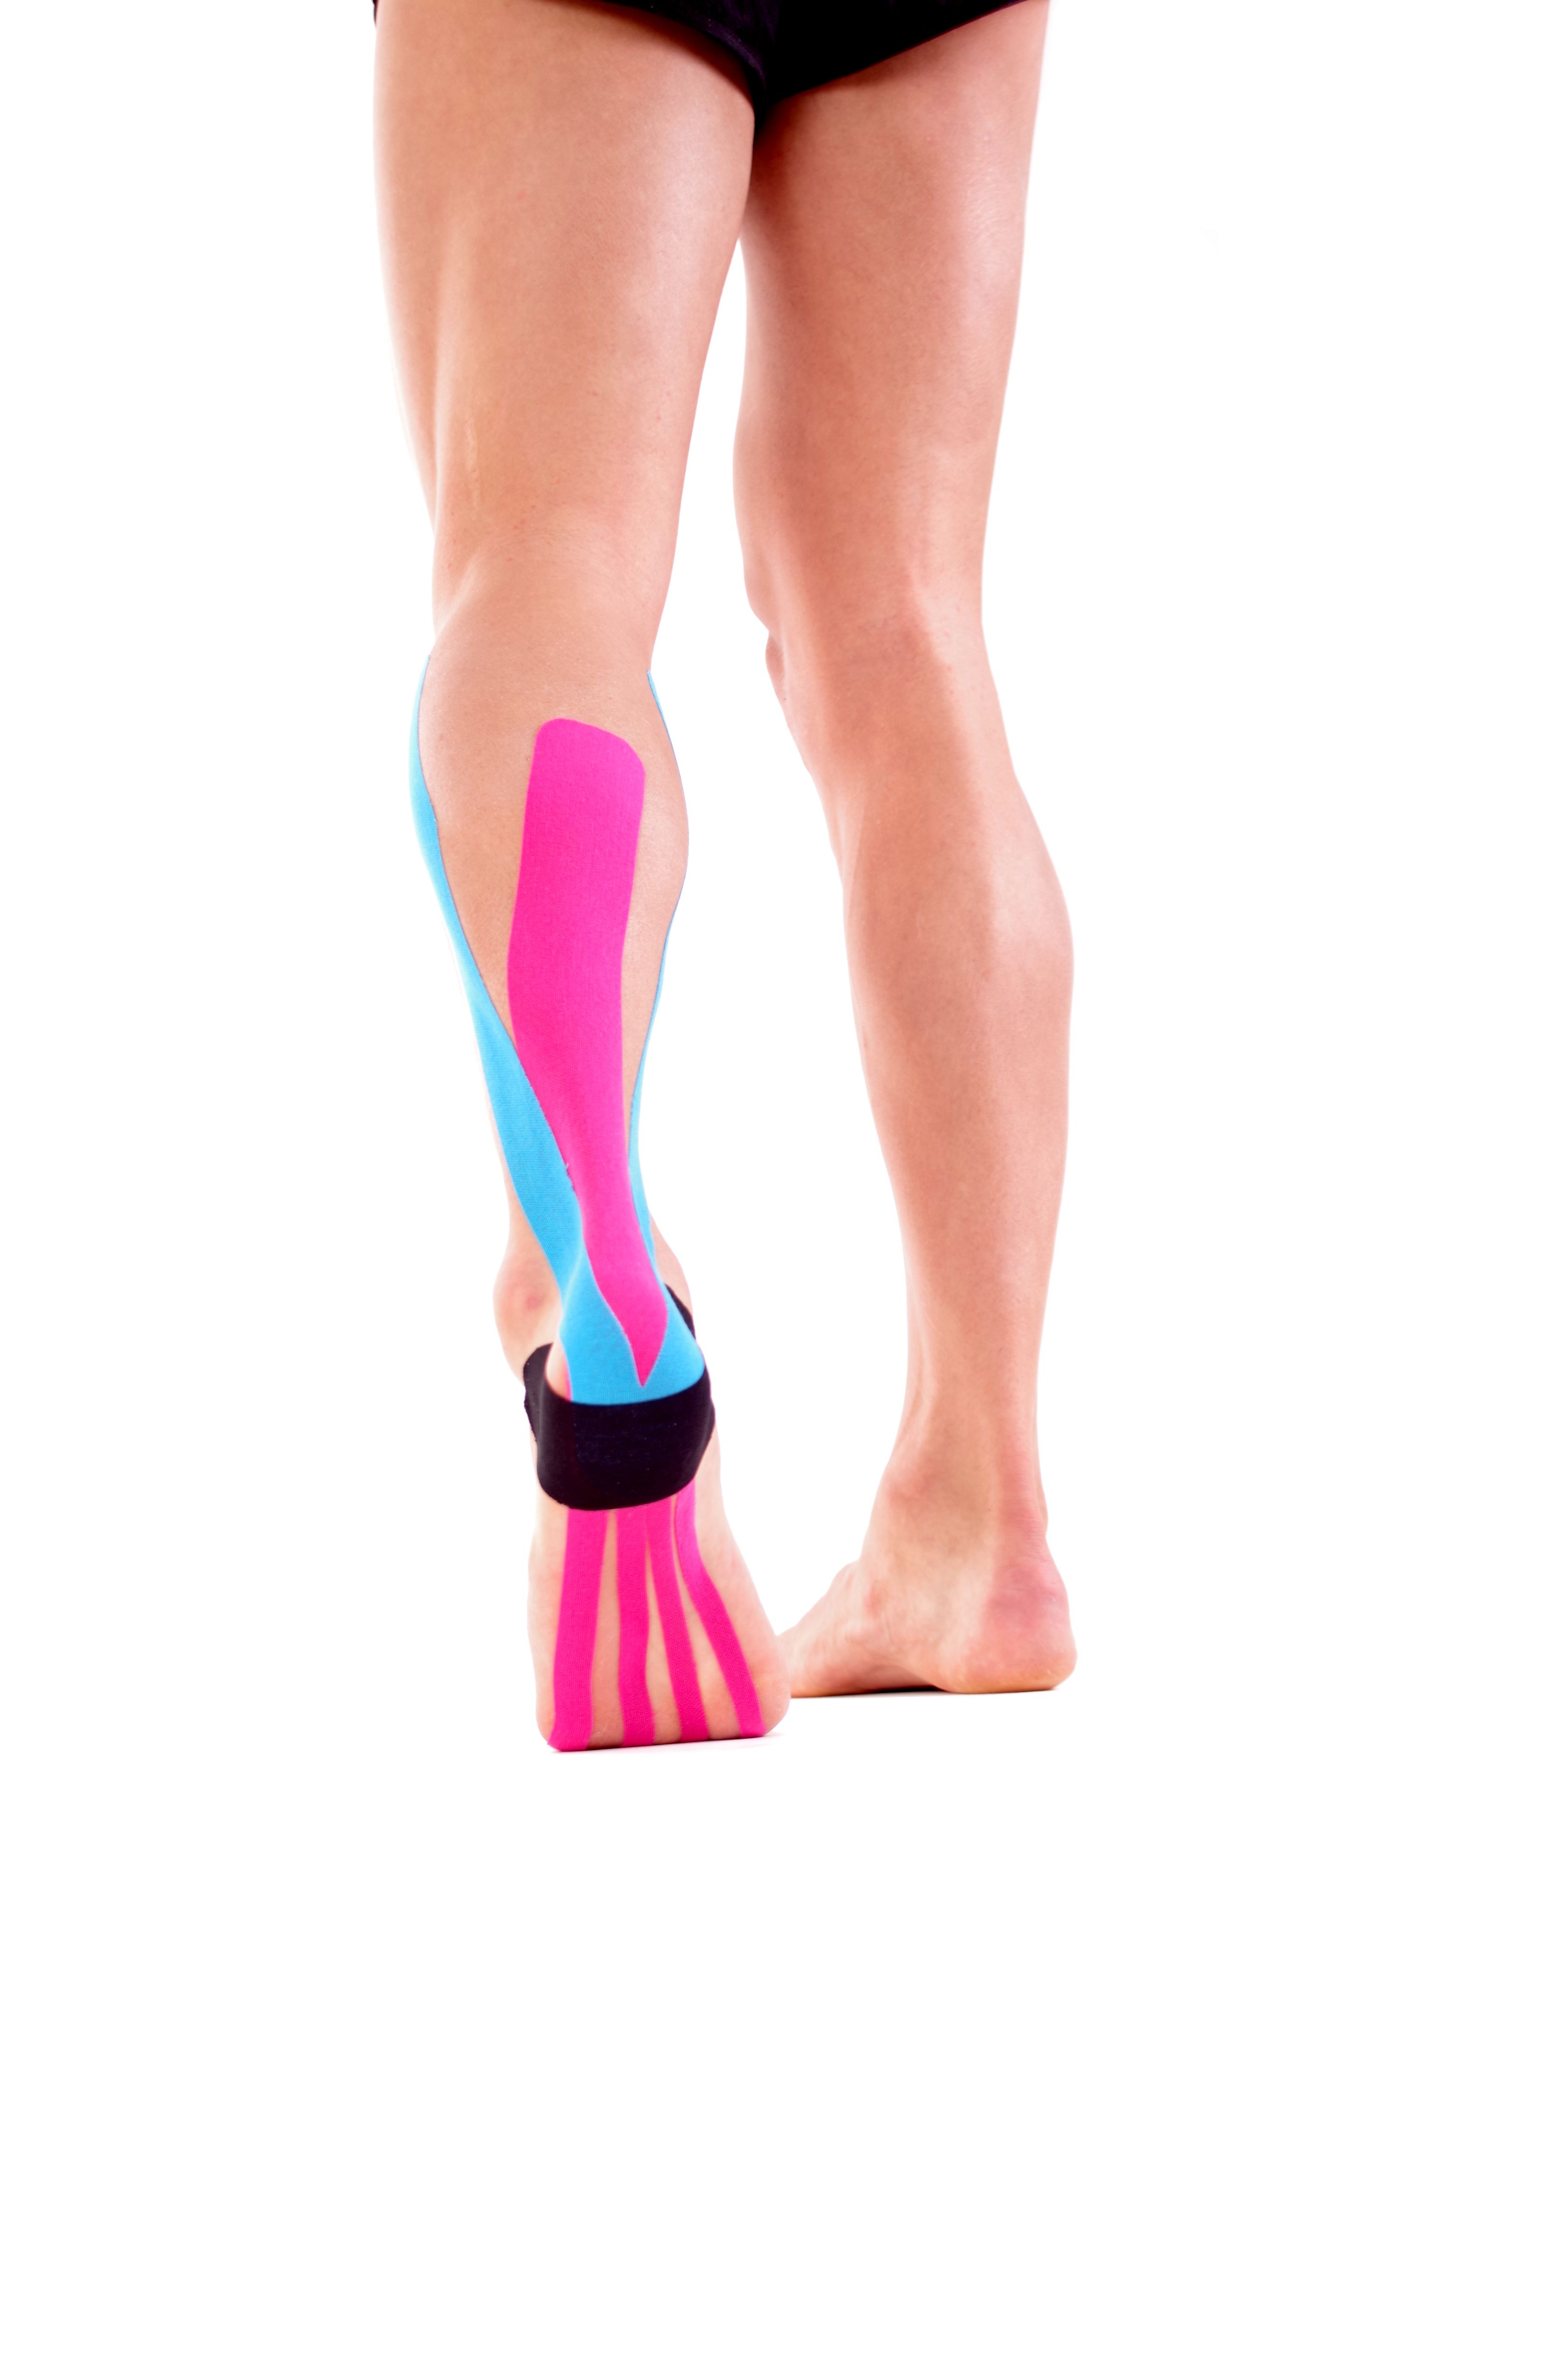 Bagvaskelse koncert eksil A new study dismisses the benefits of kinesio tape for some injuries